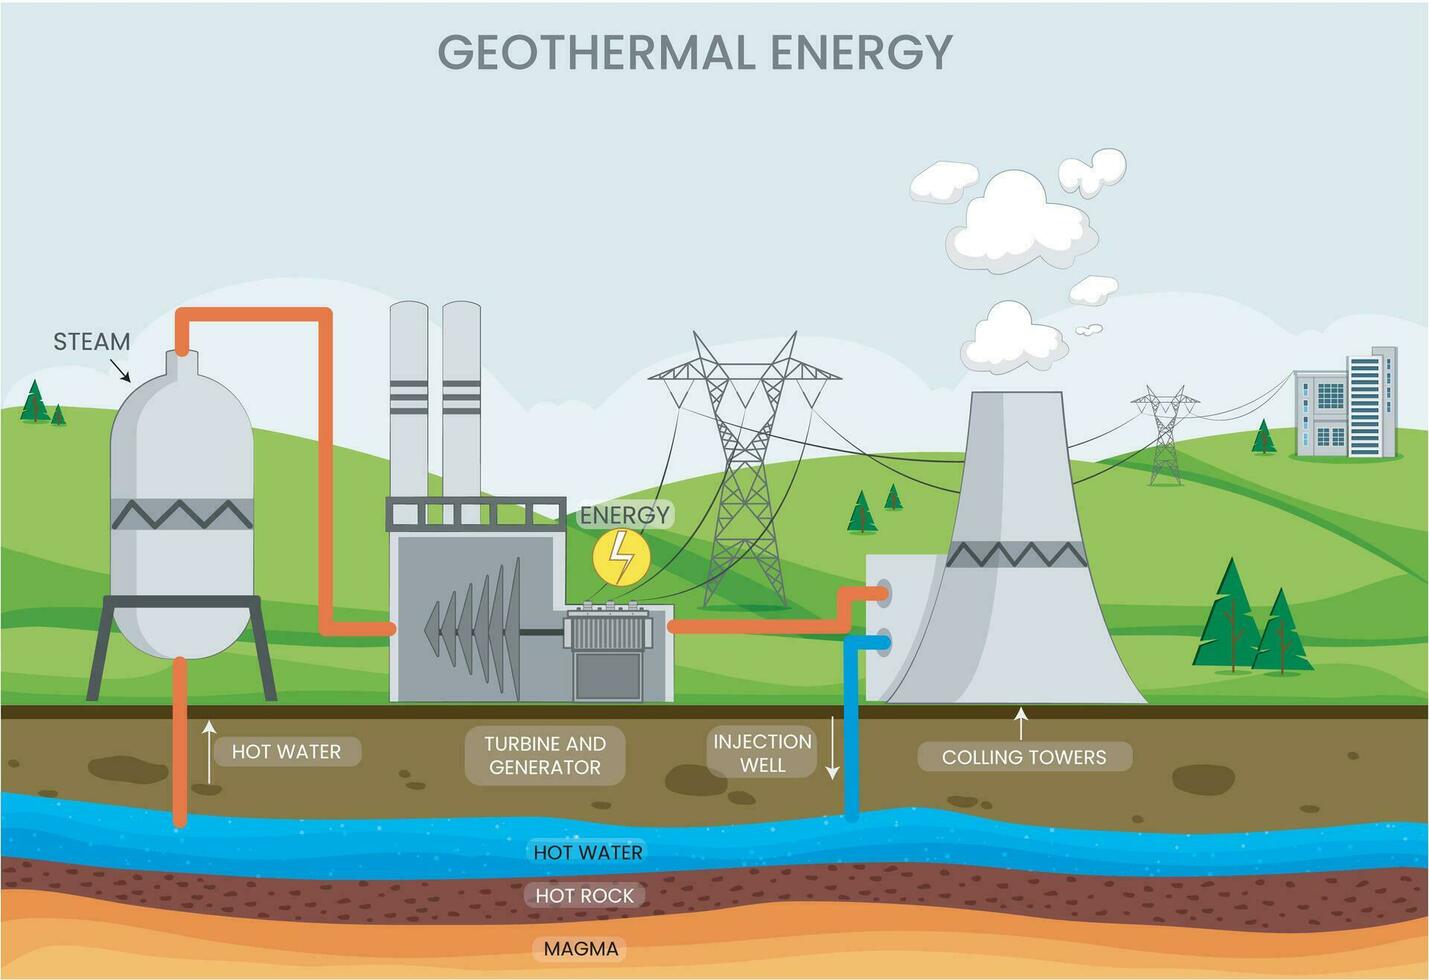 Geothermal energy uses Earth's heat for power and heating through underground hot water and steam vector